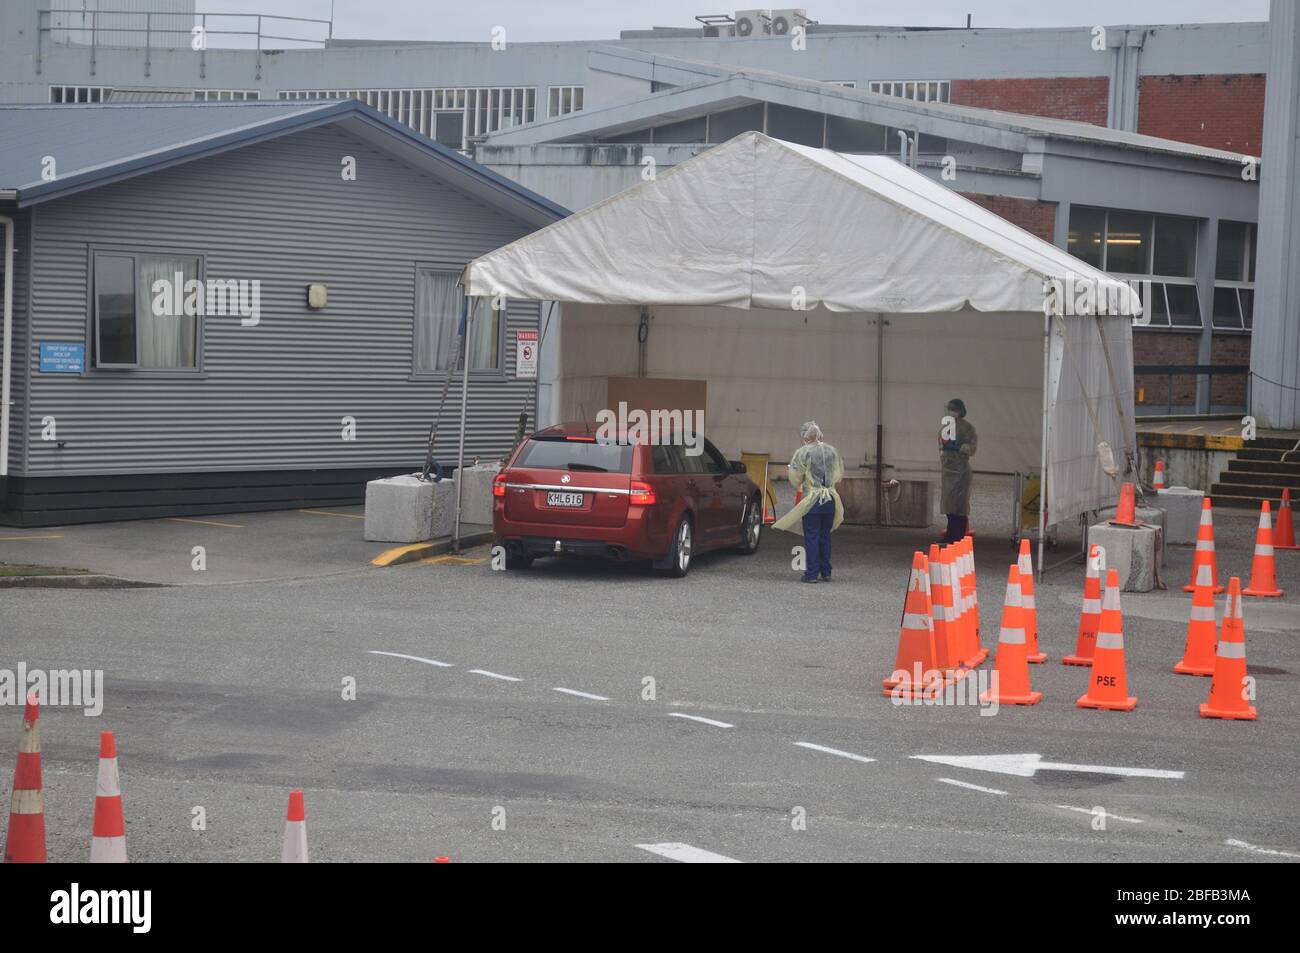 GREYMOUTH, NEW ZEALAND; APRIL 11, 2020: A vehicle visits the Covid 19 testing station at Greymouth Base Hospital during the level 4 lockdown in New Zealand, April 11,  2020 Stock Photo